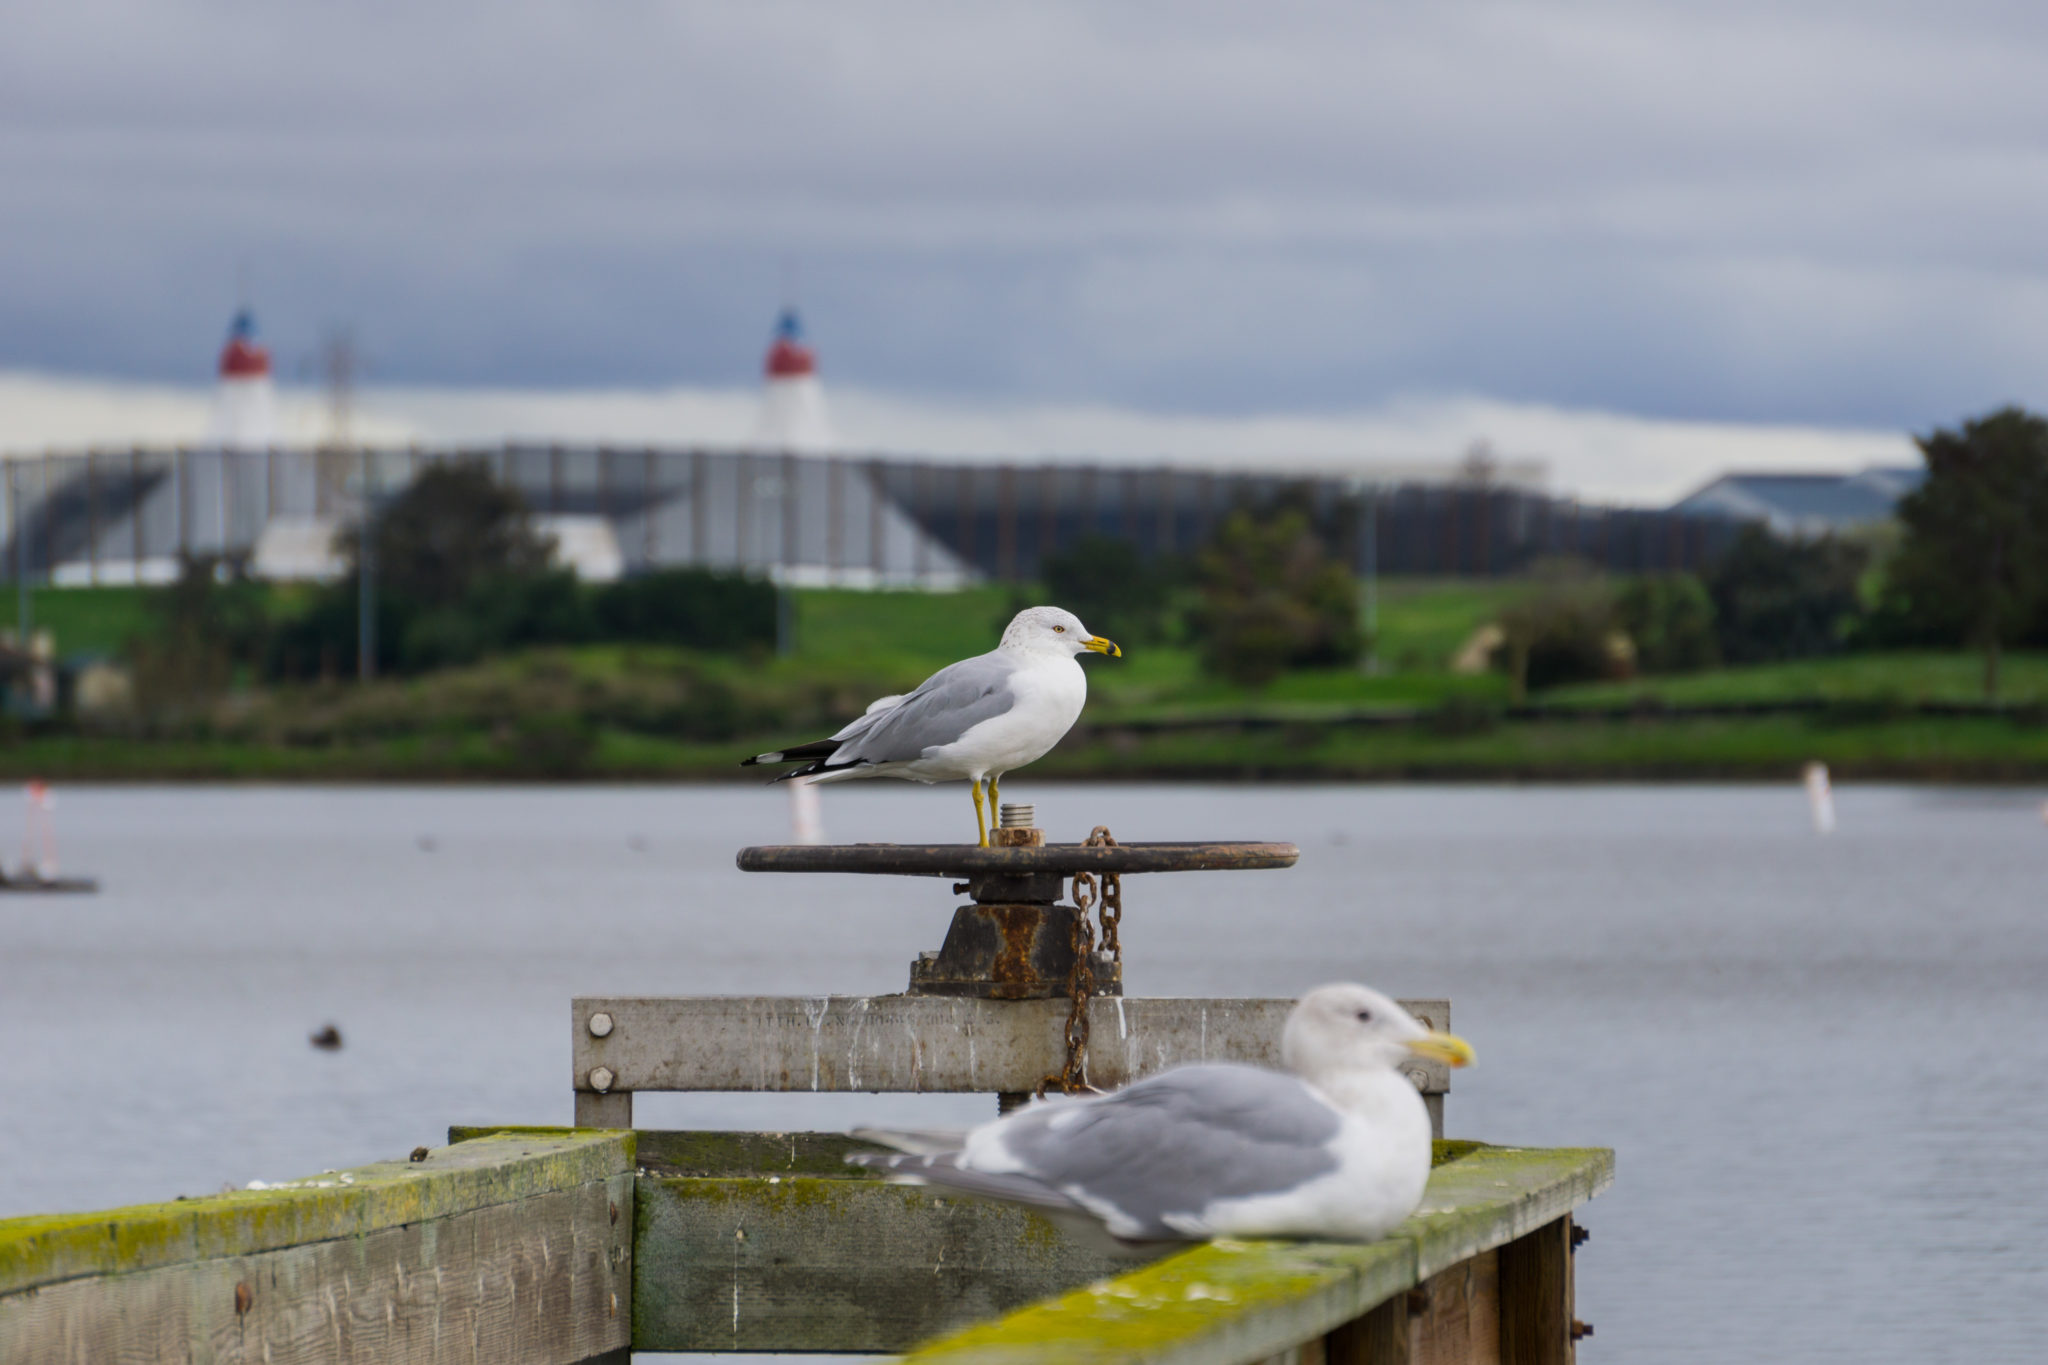 Seagulls standing on a wooden ledge on a cloudy day, Shoreline Lake and Park, Mountain View, San Francisco bay area, California; selective focus